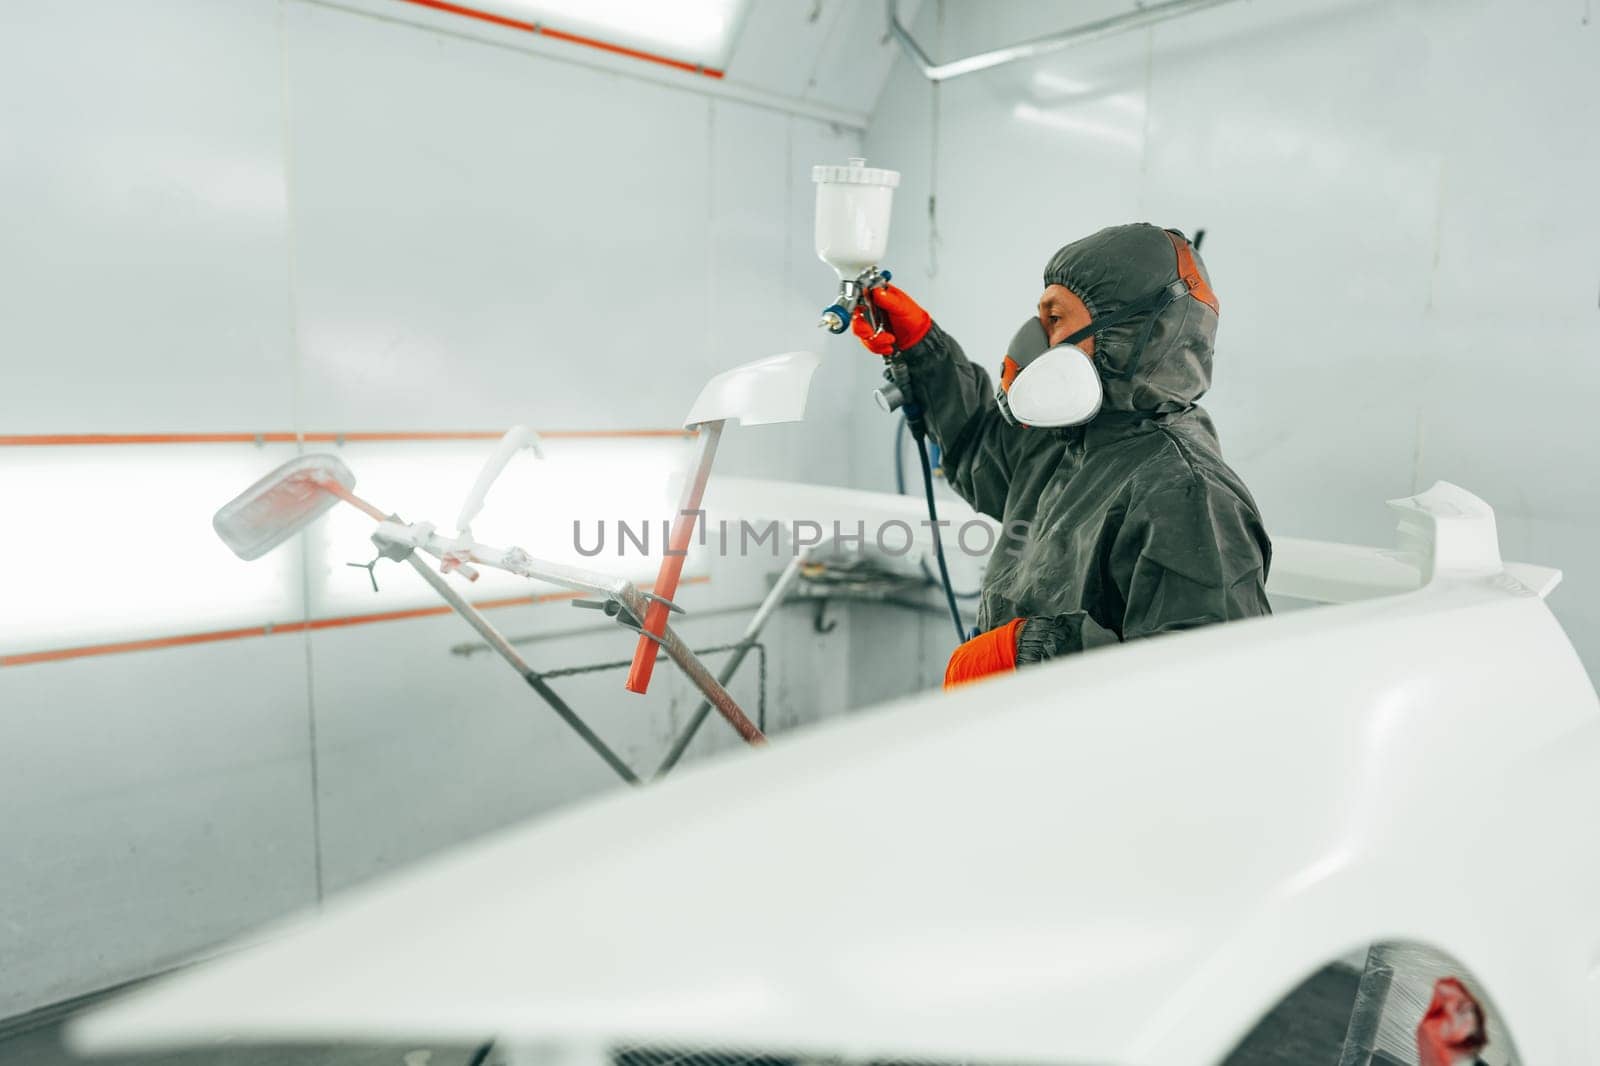 Auto painter painting a car with vaporizer gun inside a paint booth close up